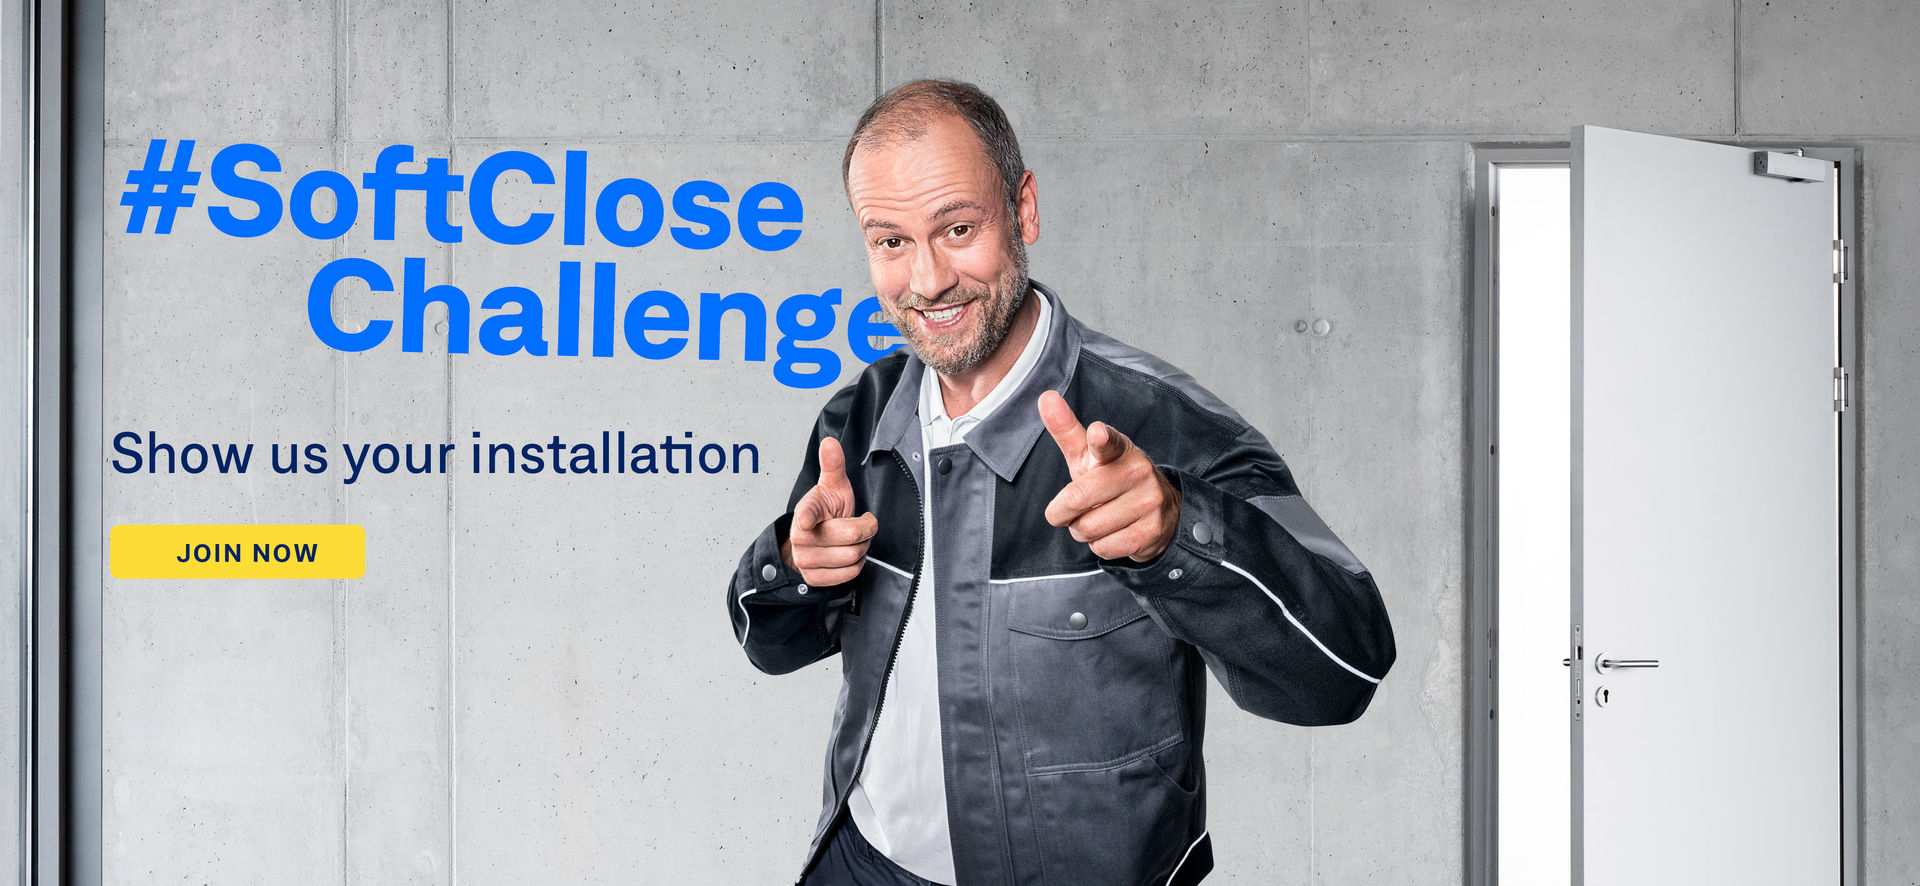 Share a video on Instagram with the hashtag #SoftCloseChallenge showing us how you adjusted the settings on your installed TS 5000 SoftClose. 